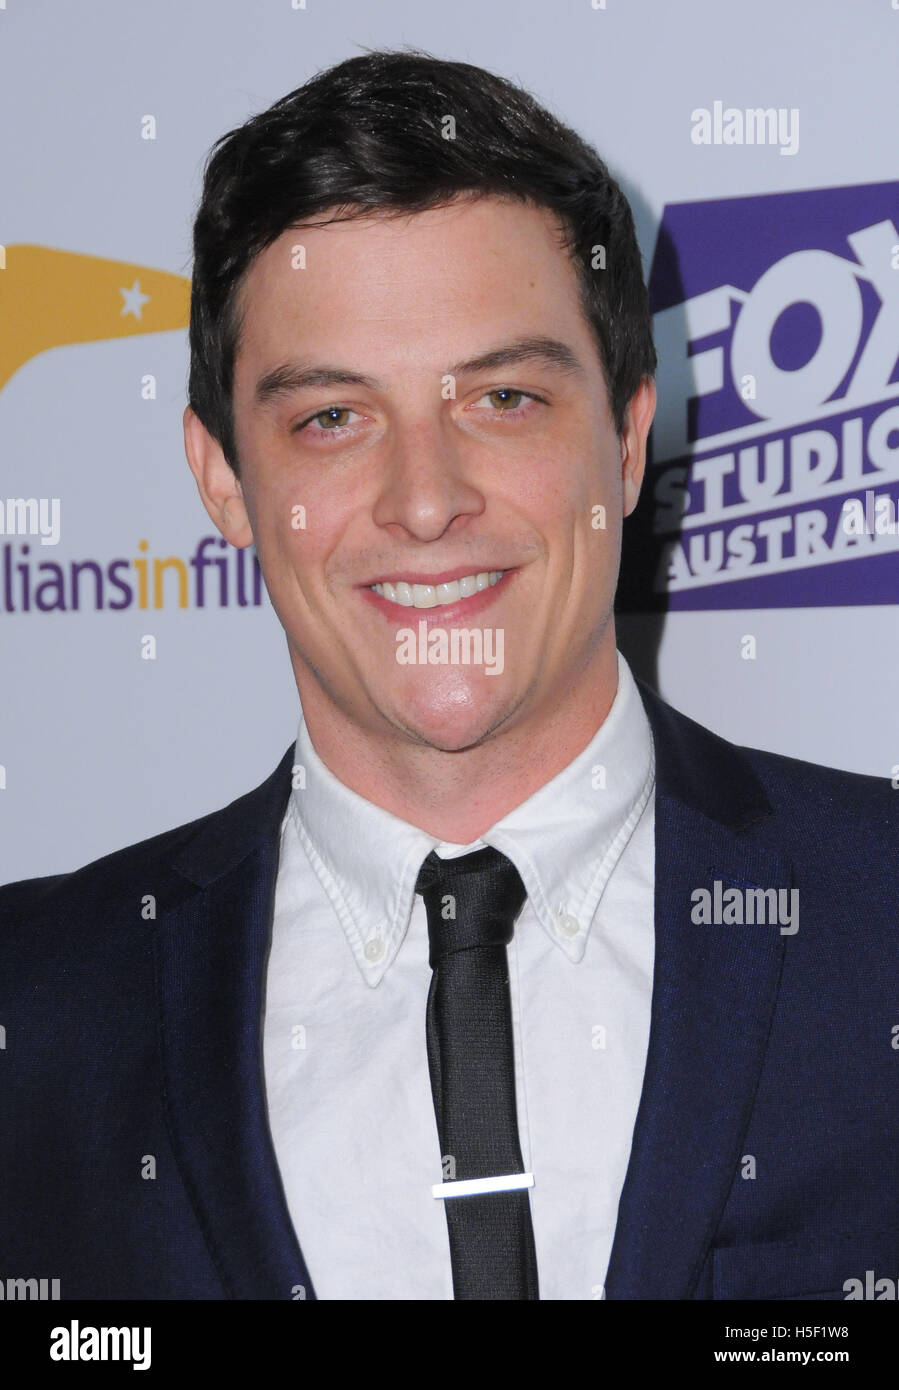 Hollywood, CA, USA. 19th Oct, 2016. 19 October 2016 - Hollywood, California. James MacKay. Australians In Film's 5th Annual Awards Gala held at NeueHouse. Photo Credit: Birdie Thompson/AdMedia Credit:  Birdie Thompson/AdMedia/ZUMA Wire/Alamy Live News Stock Photo